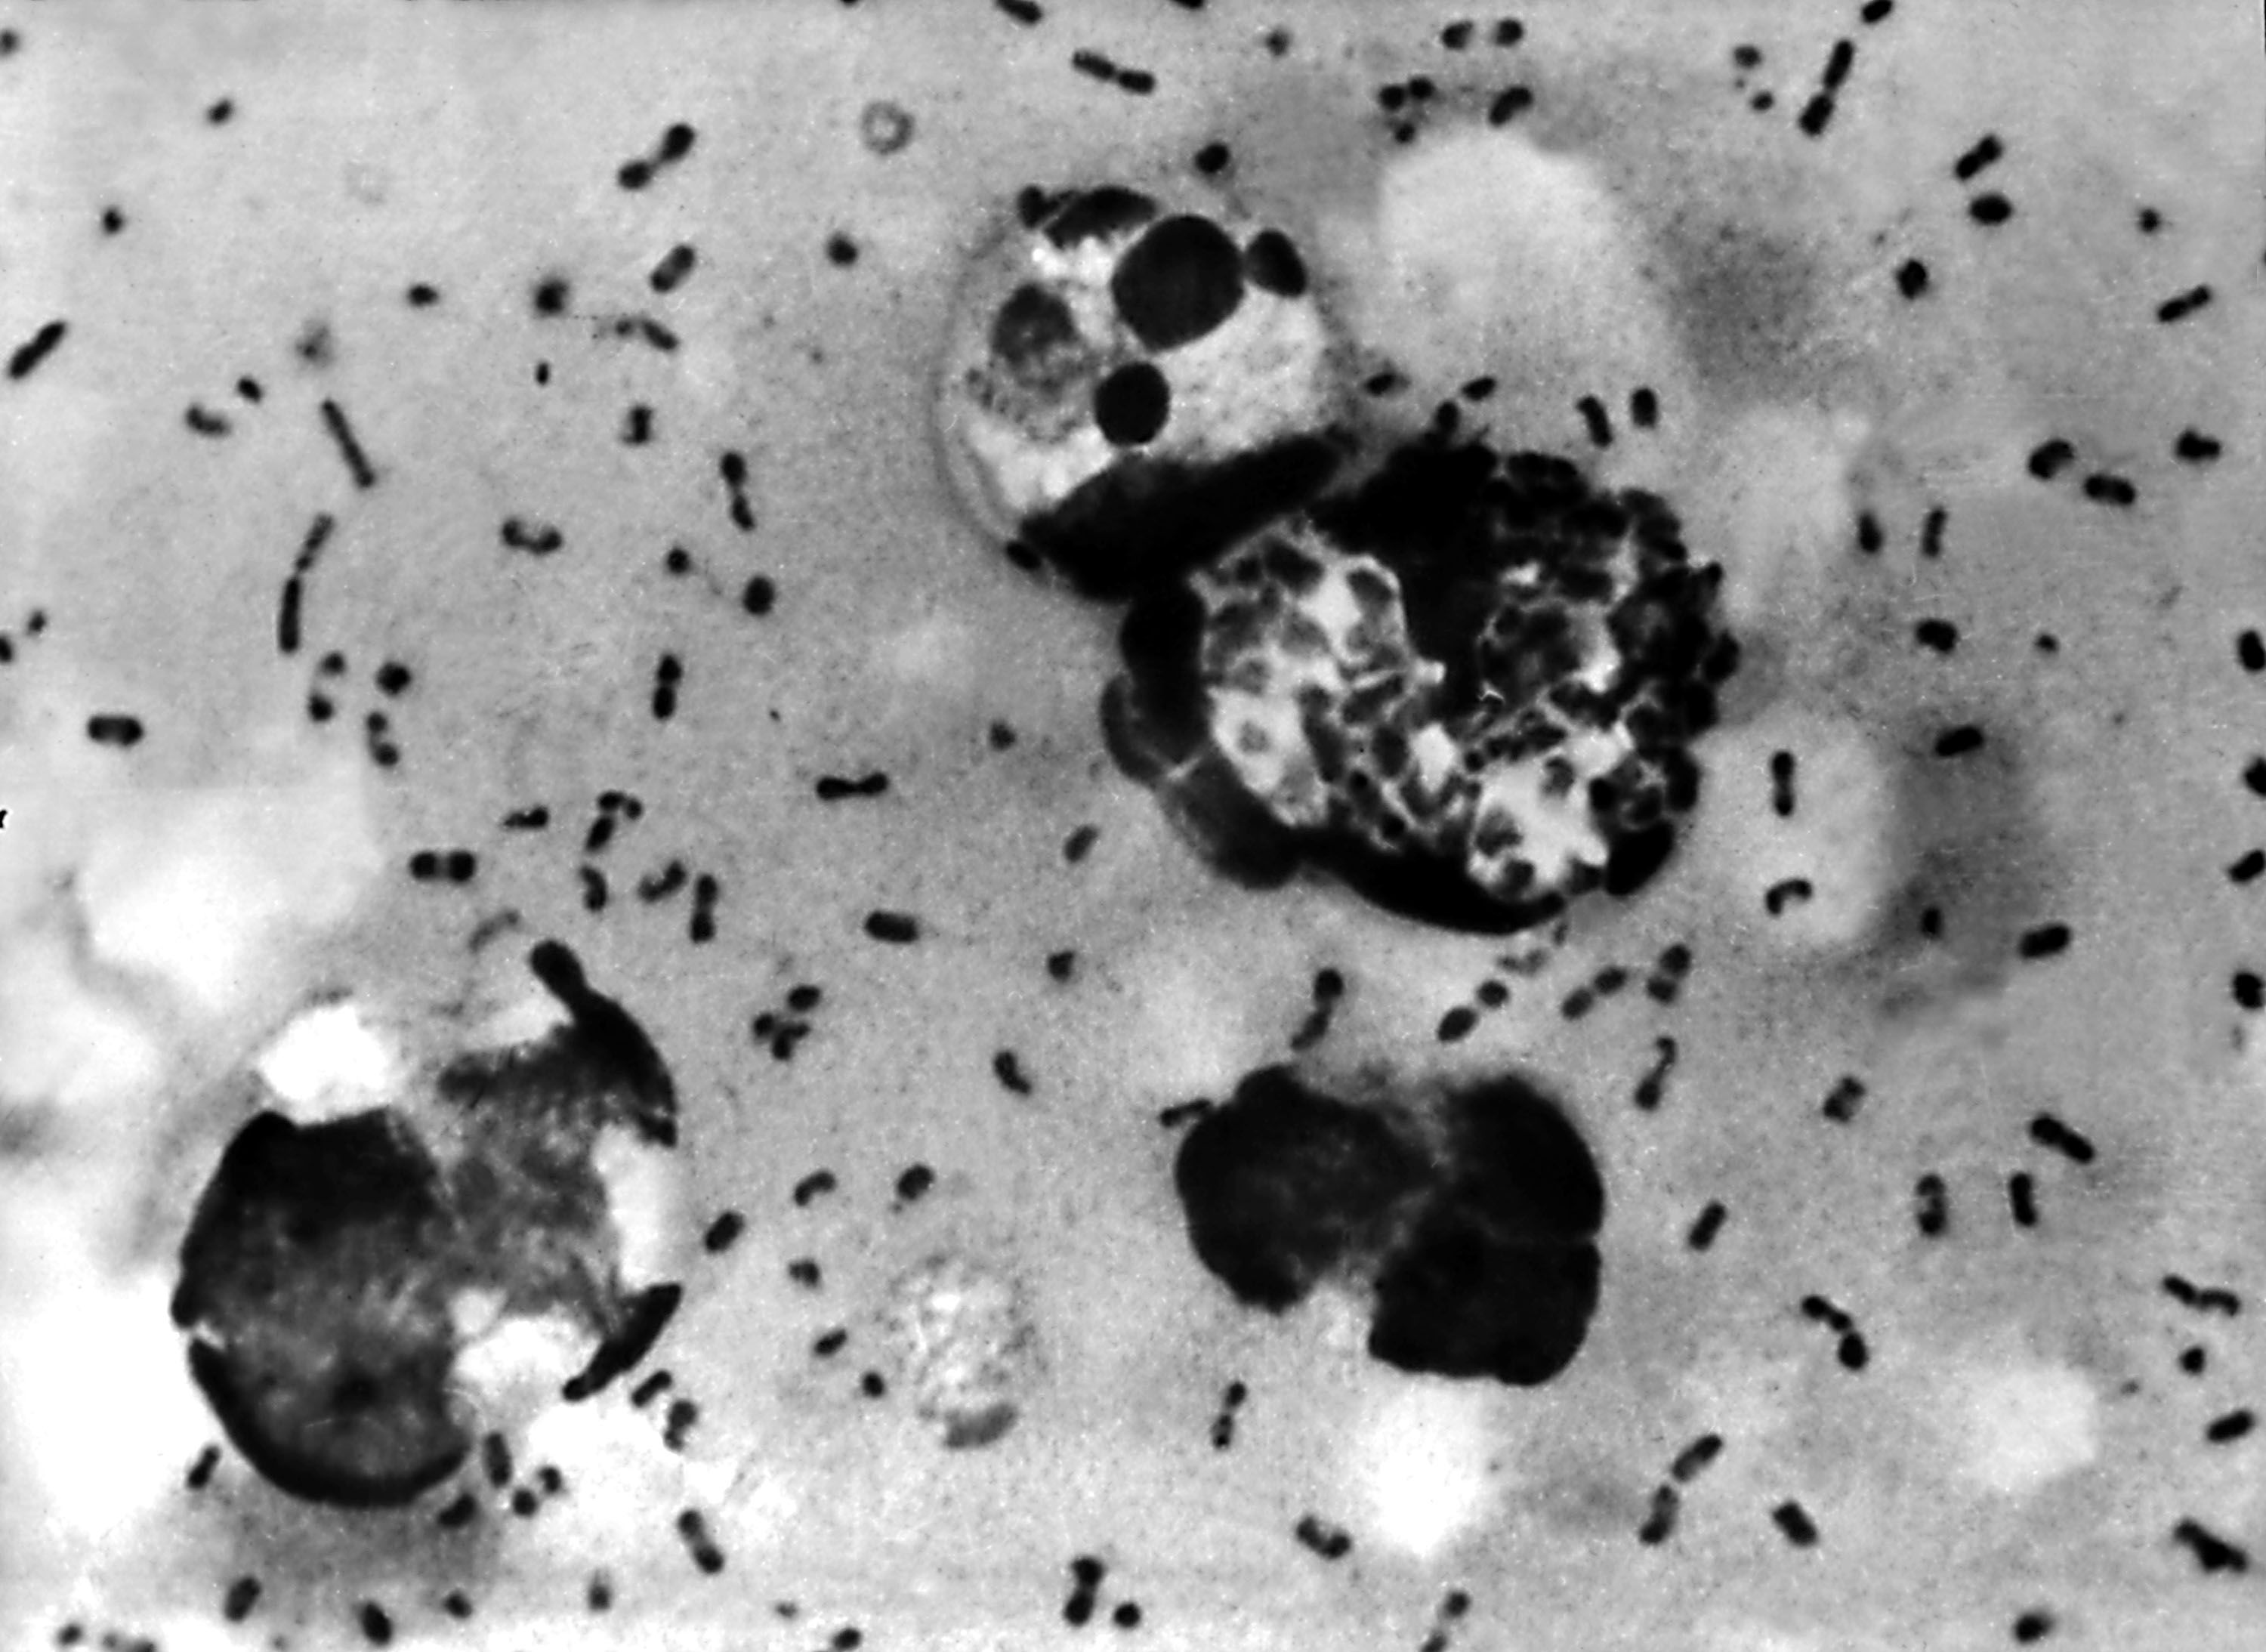 A bubonic plague smear, prepared from a lymph removed from an adenopathic lymph node, or bubo, of a plague patient, demonstrates the presence of the Yersinia pestis bacteria that causes the plague in this undated photo. (Photo by Centers for Disease Control and Prevention/Getty Images)